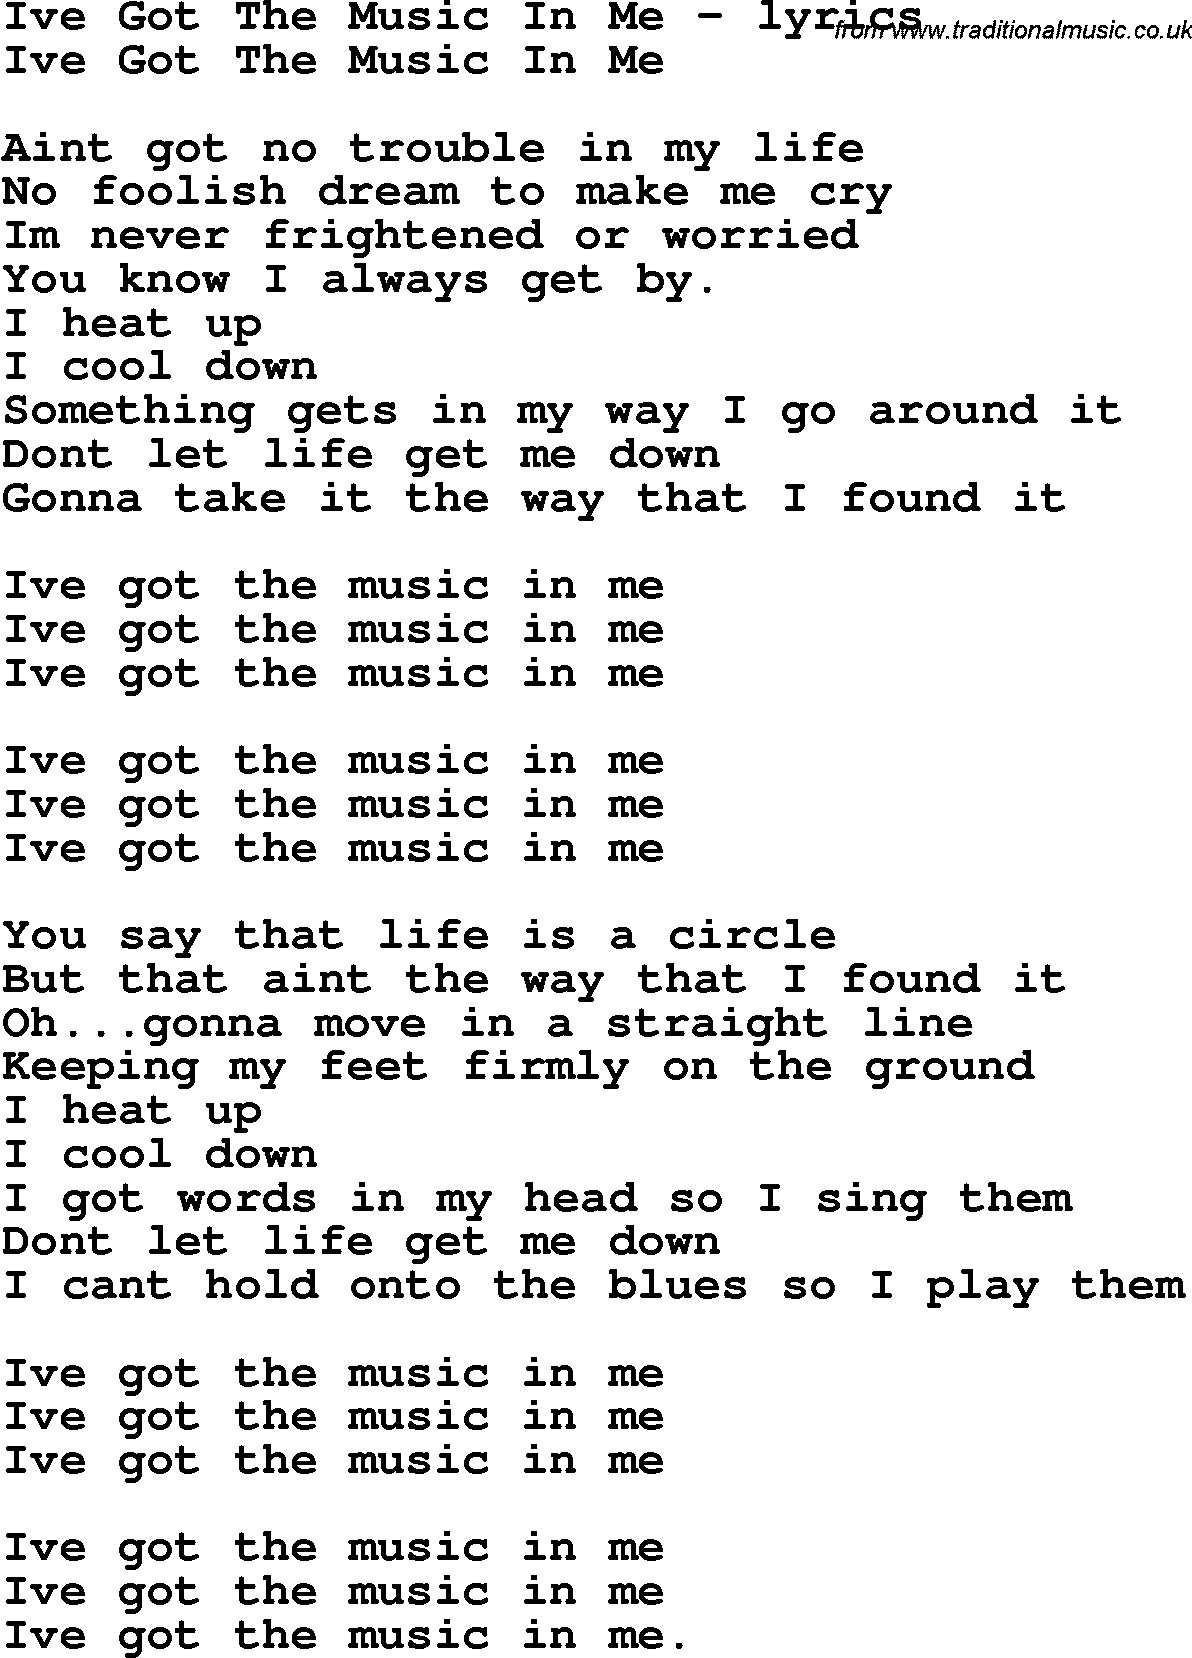 Love Song Lyrics for: Ive Got The Music In Me